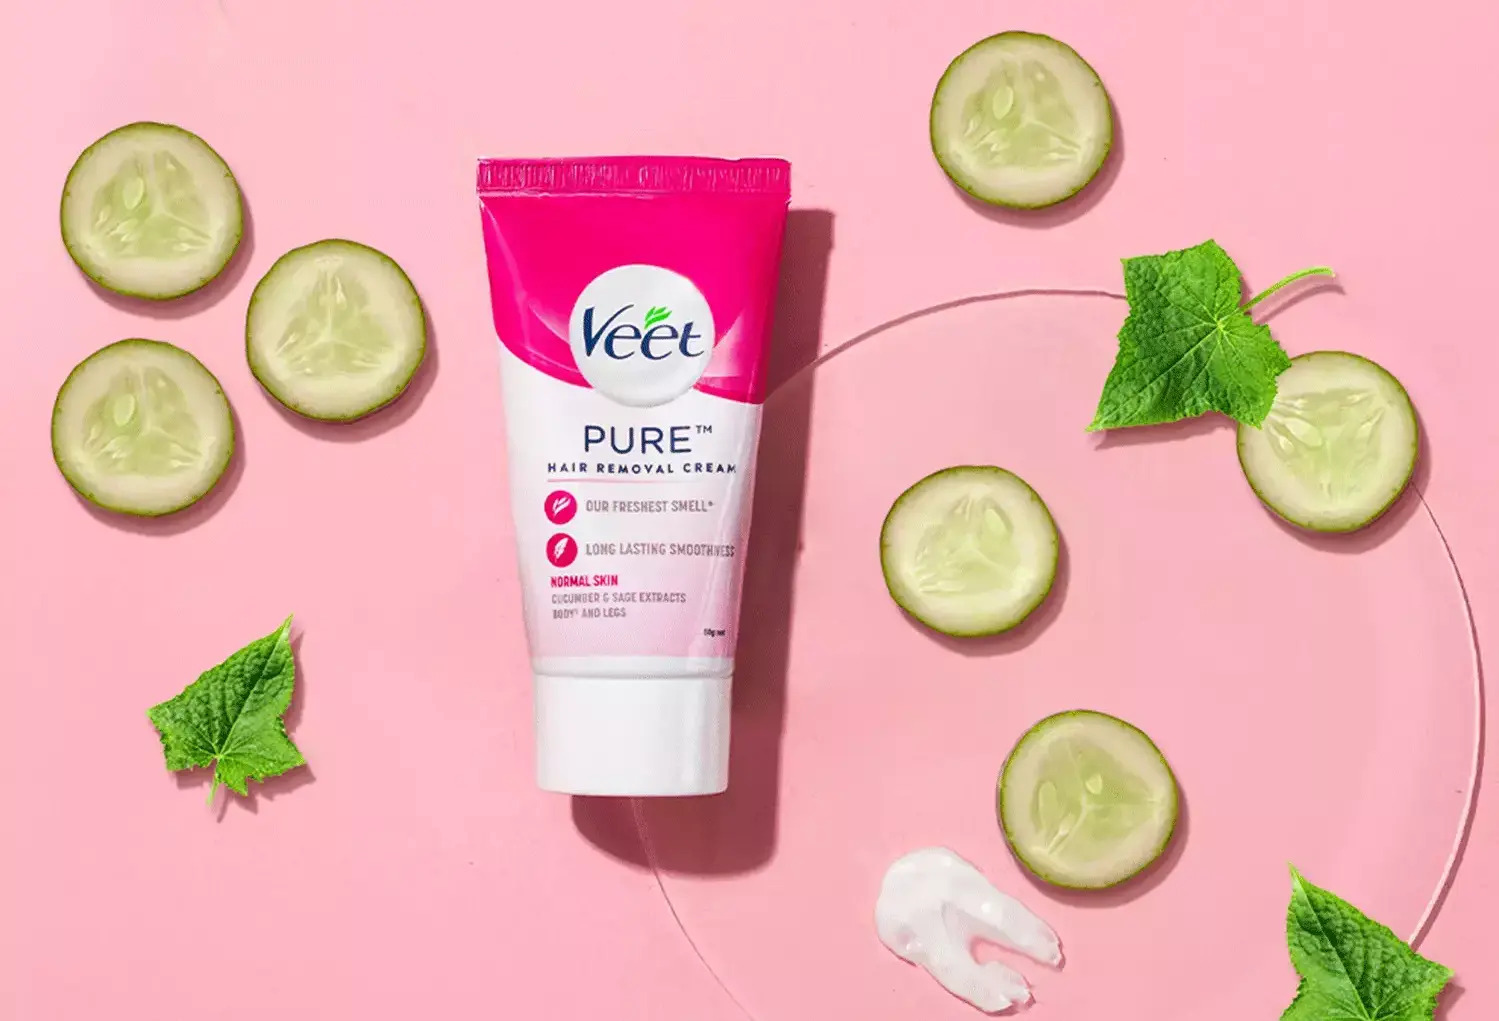 How To Use Veet Hair Removal Cream On Male Private Parts